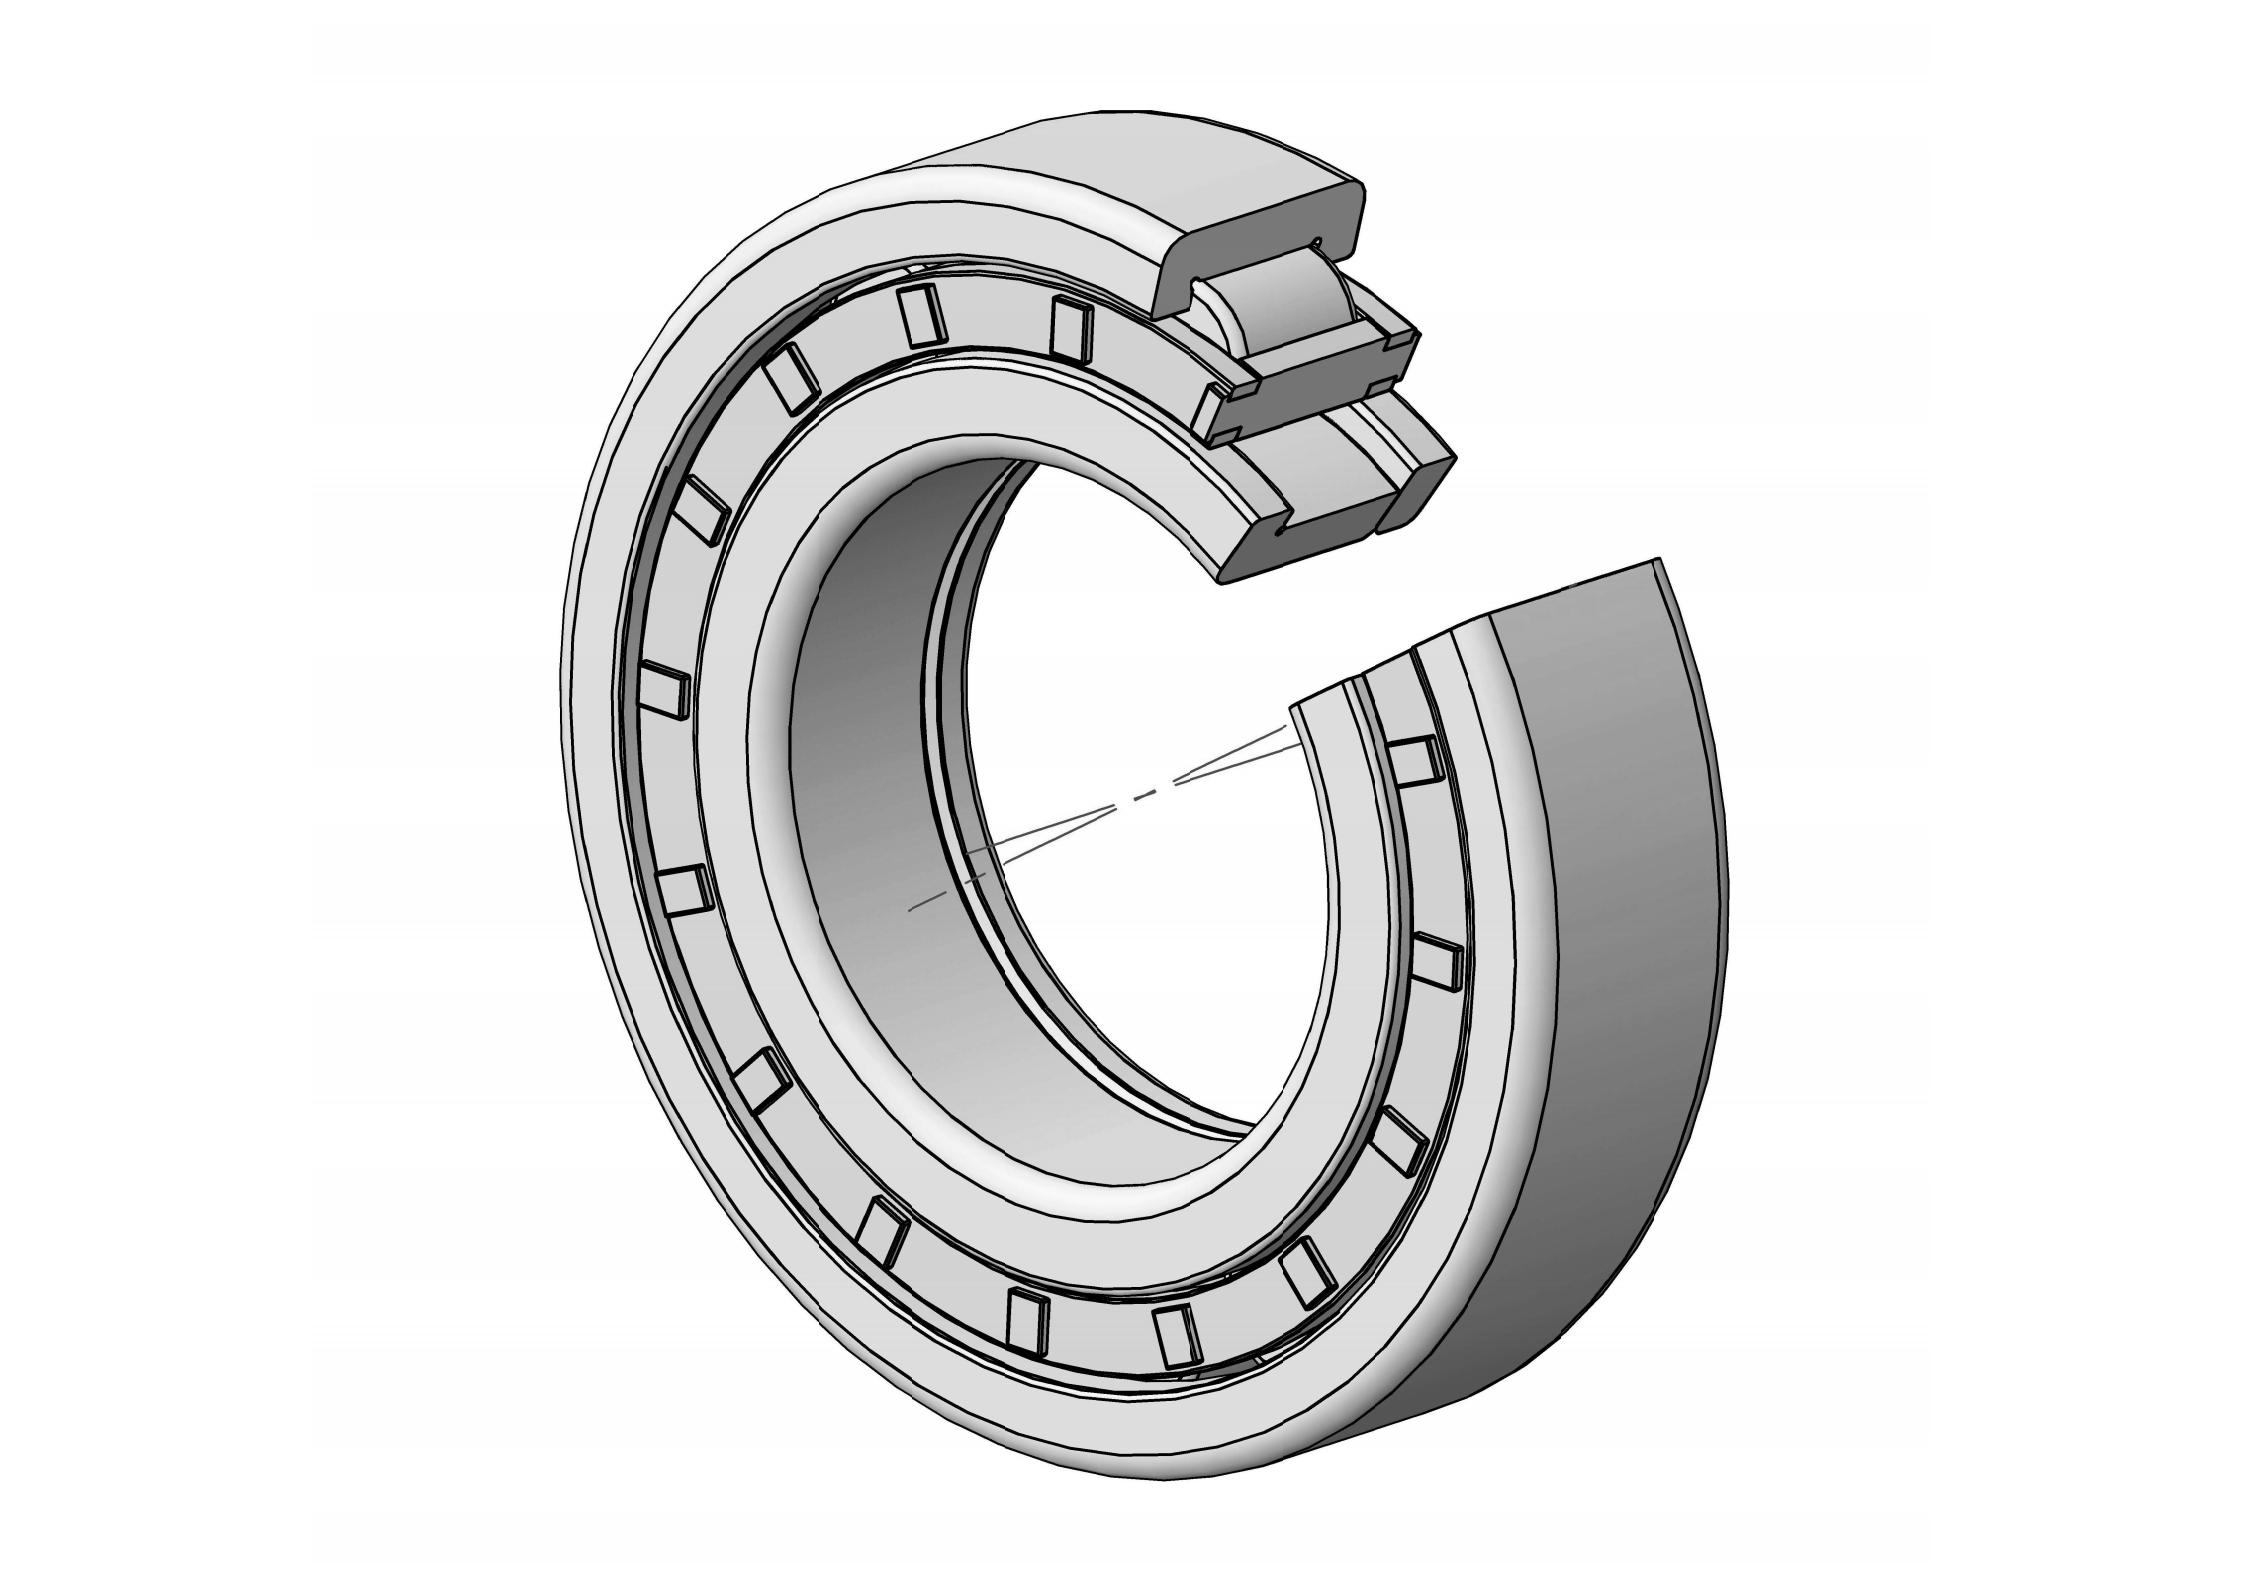 NUP207-E Single Row Cylindrical roller bearing 